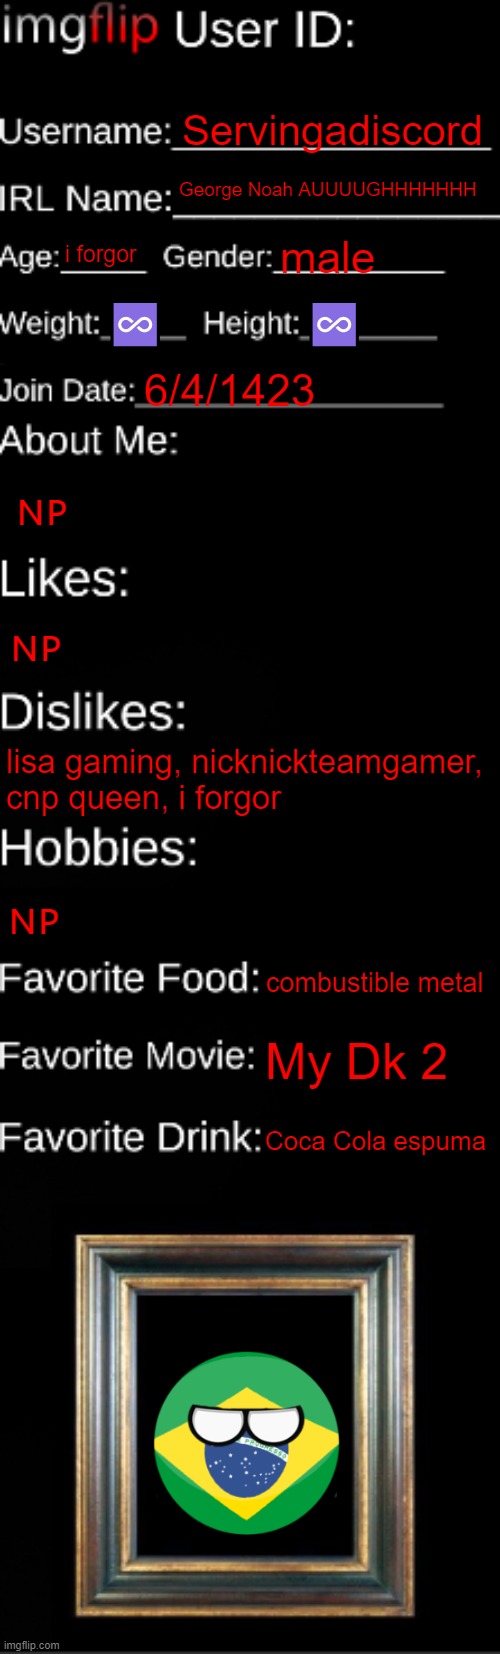 this is me :| | Servingadiscord; George Noah AUUUUGHHHHHHH; i forgor; male; ♾️; ♾️; 6/4/1423; 🇳🇵; 🇳🇵; lisa gaming, nicknickteamgamer, cnp queen, i forgor; 🇳🇵; combustible metal; My Dk 2; Coca Cola espuma | image tagged in imgflip id card,i think i forgot something,brazil | made w/ Imgflip meme maker